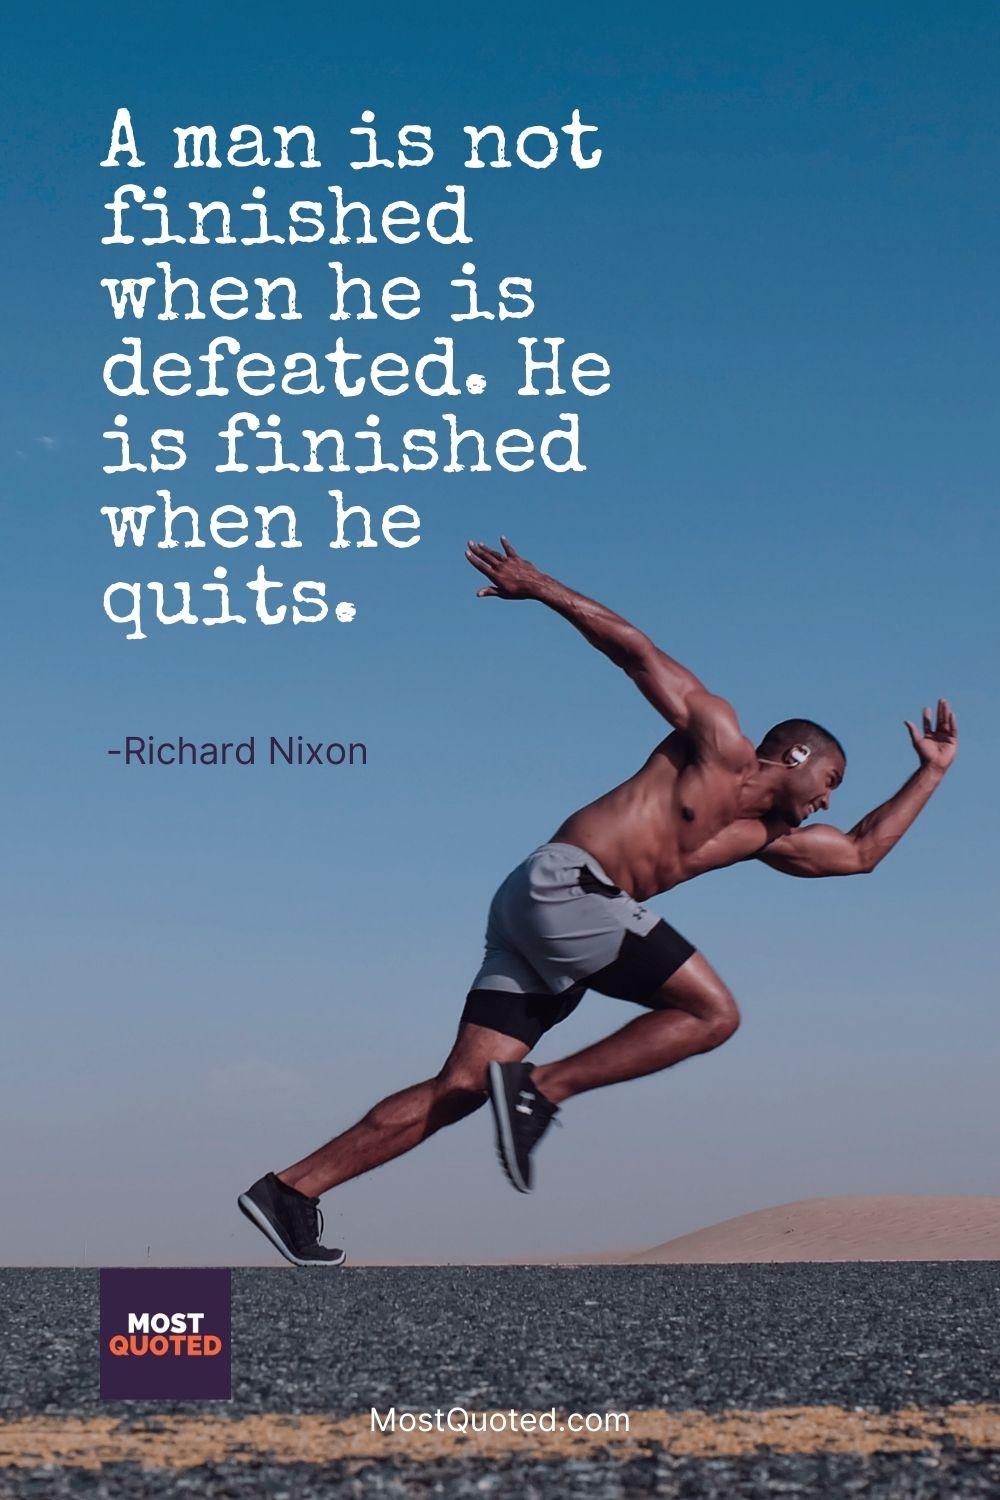 A man is not finished when he is defeated. He is finished when he quits. - Richard Nixon